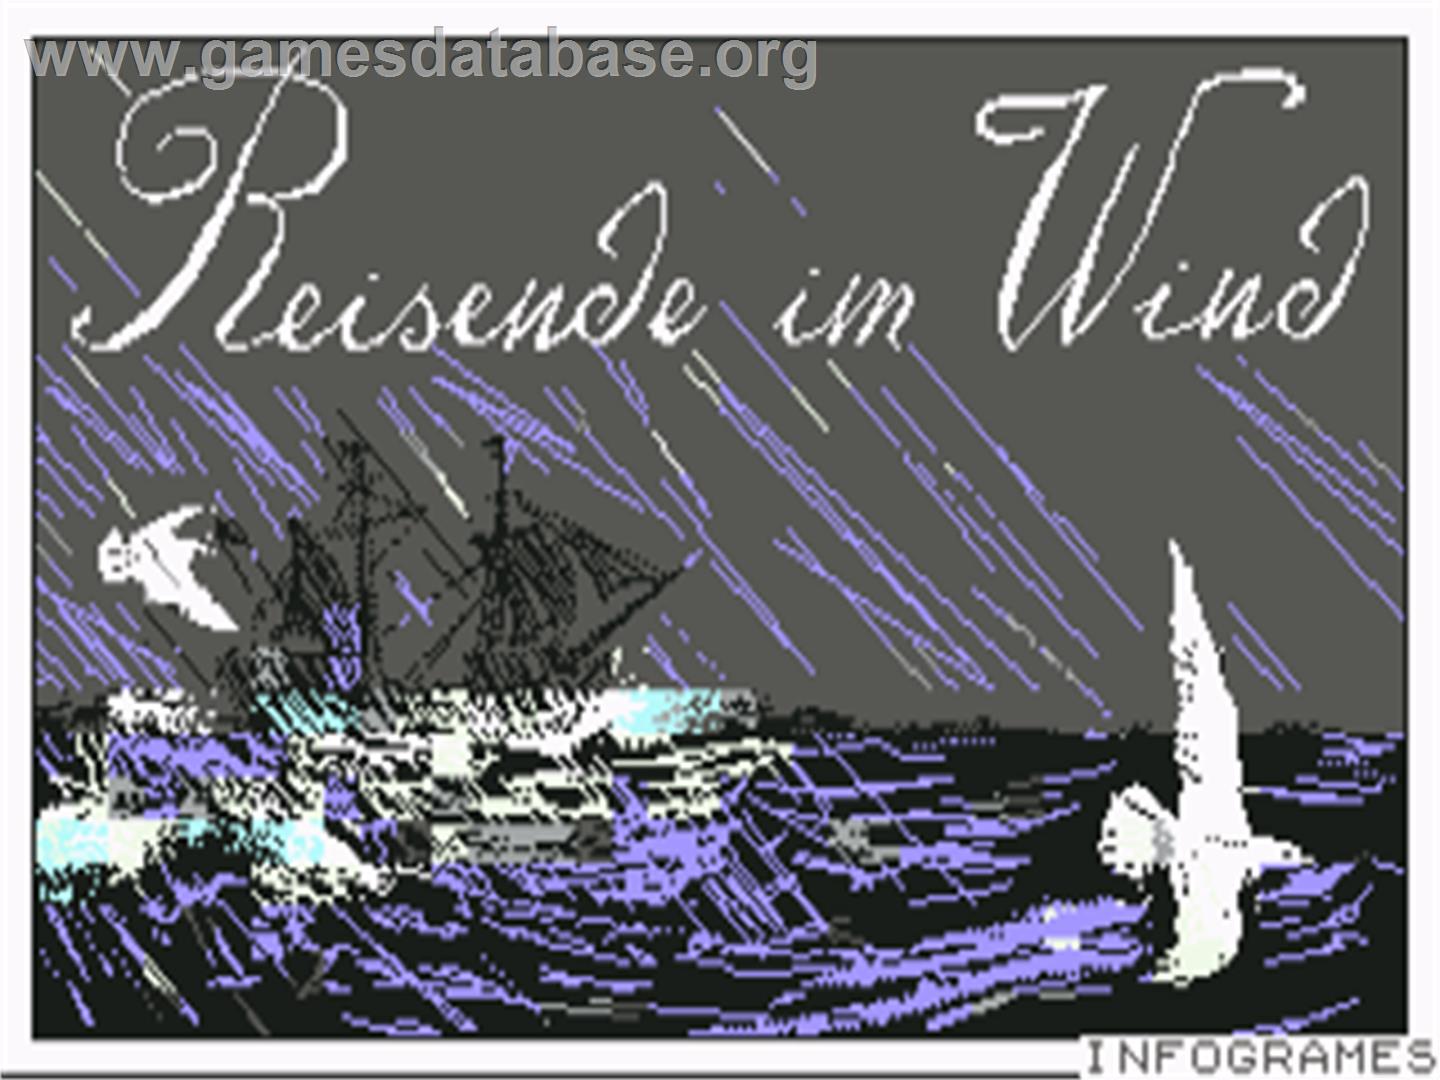 Passengers on the Wind - Commodore 64 - Artwork - Title Screen